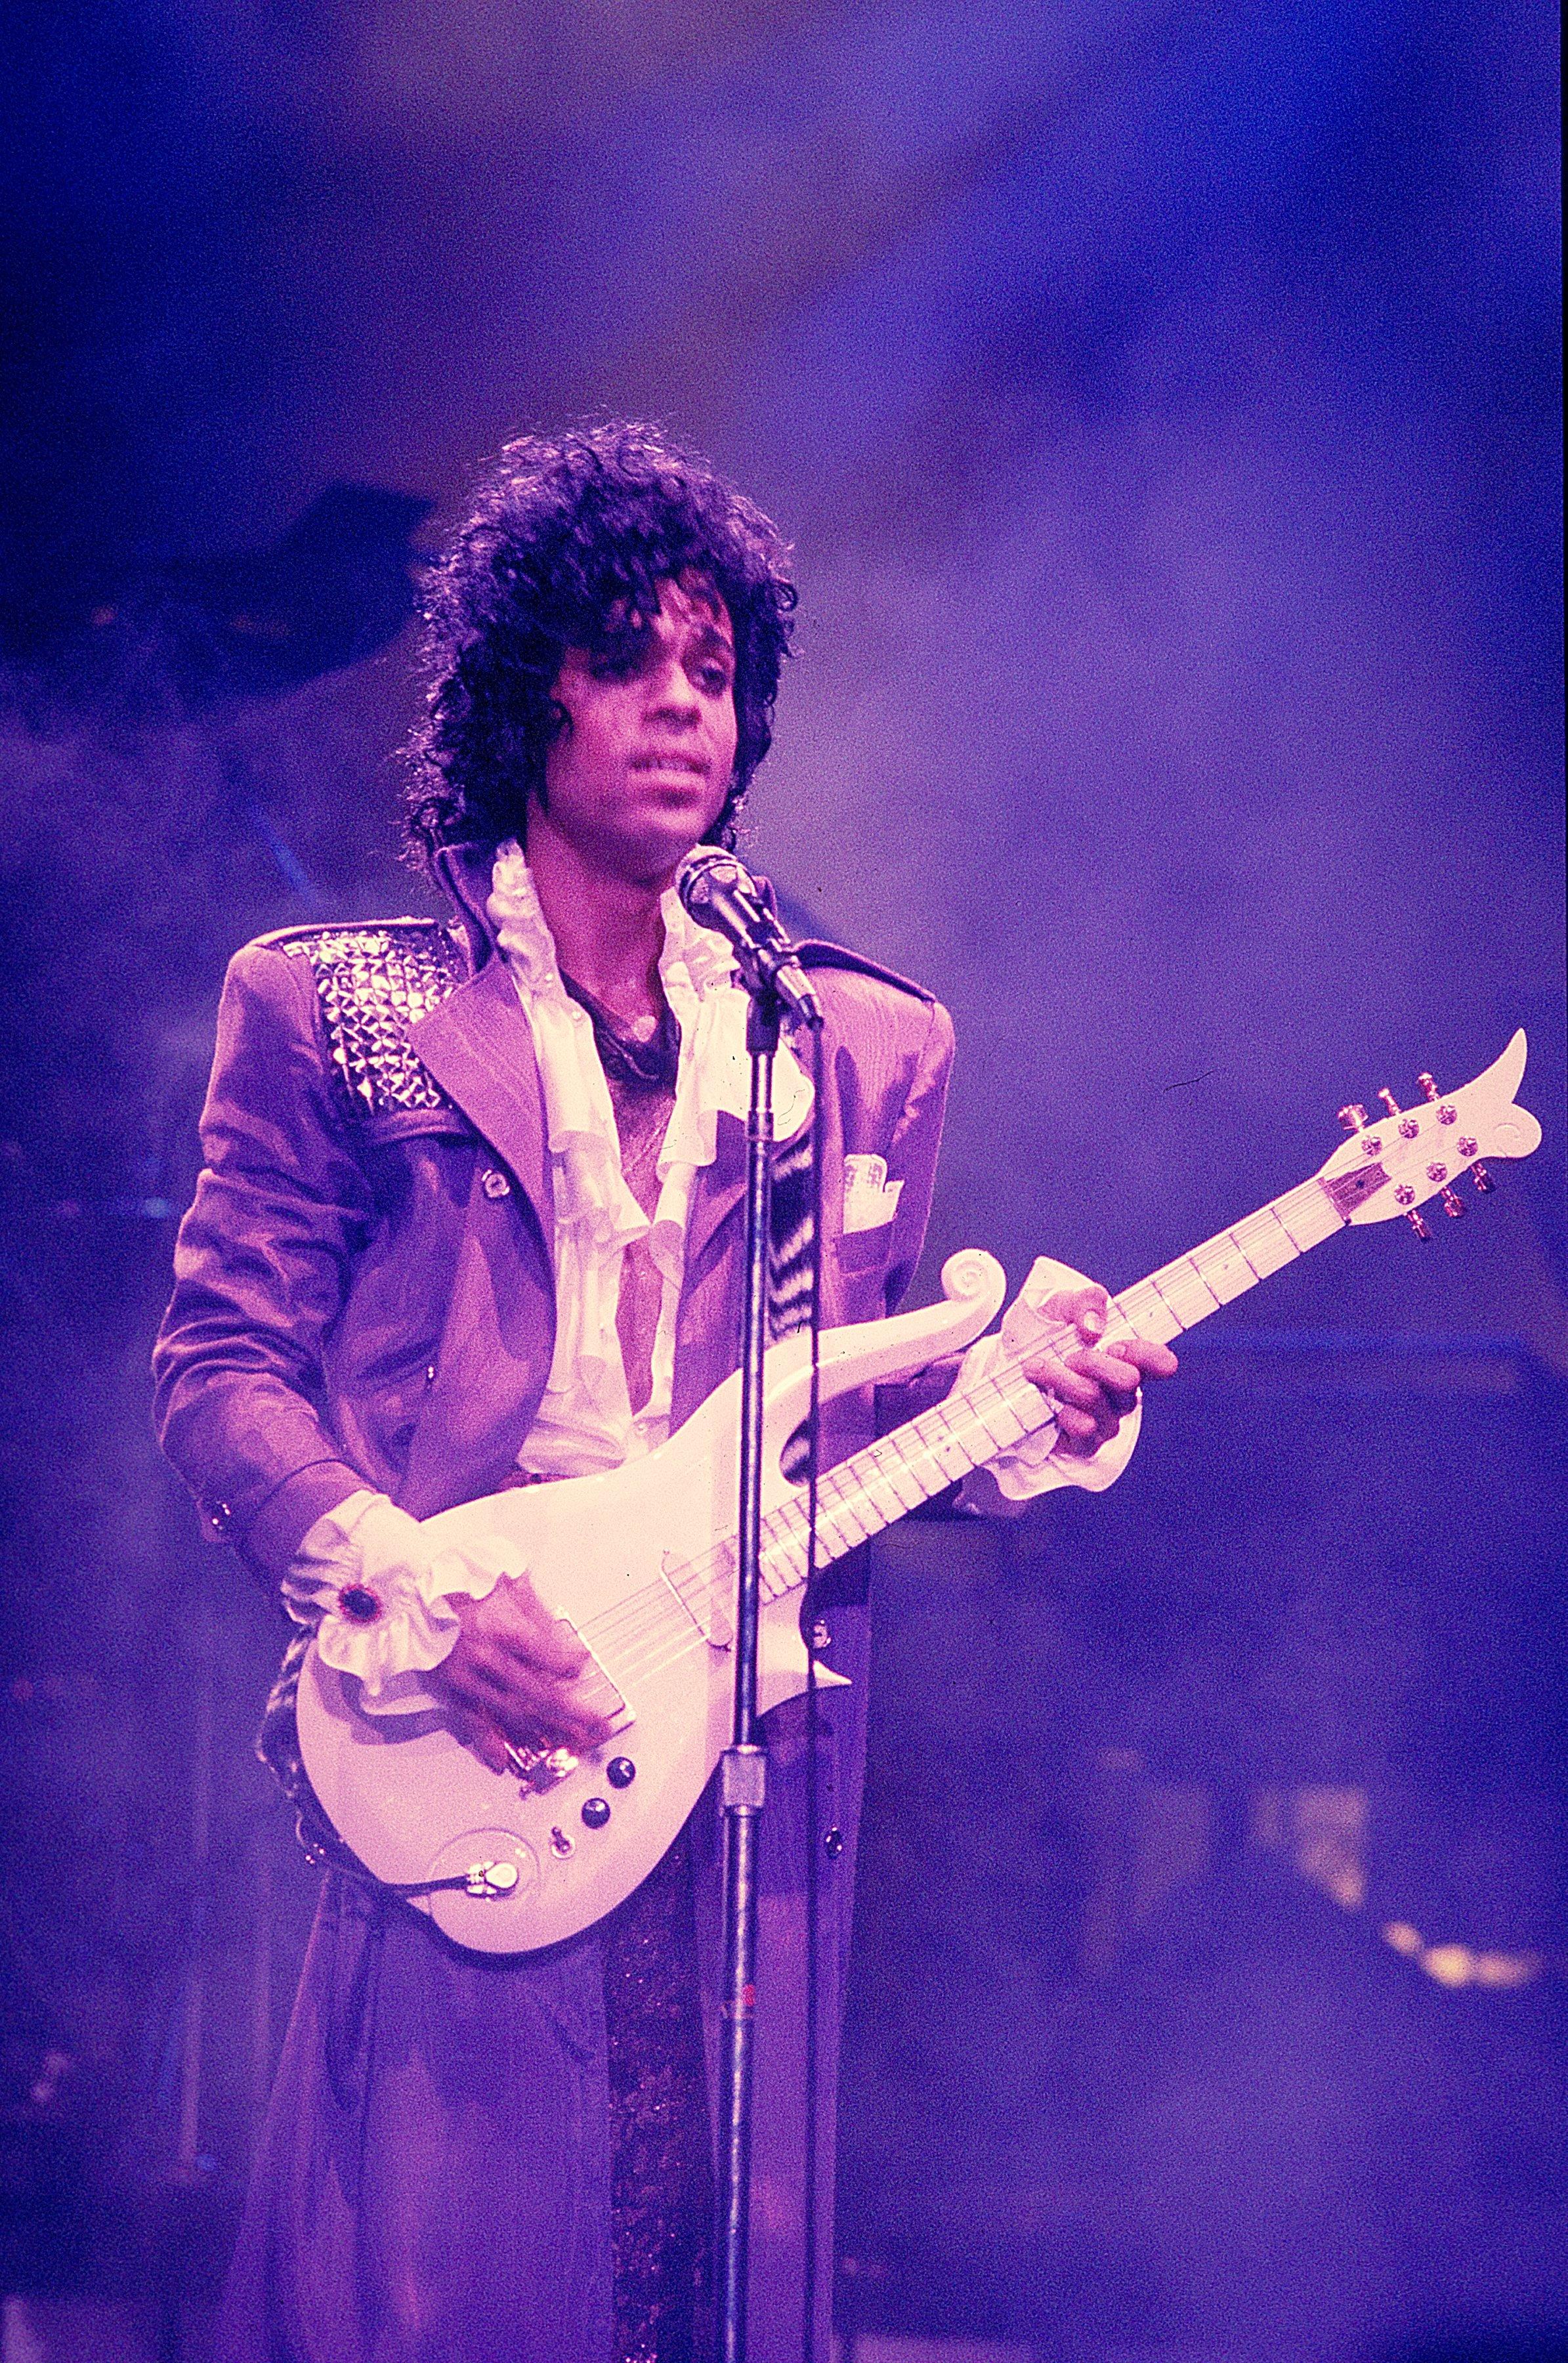 Prince on stage in 1984